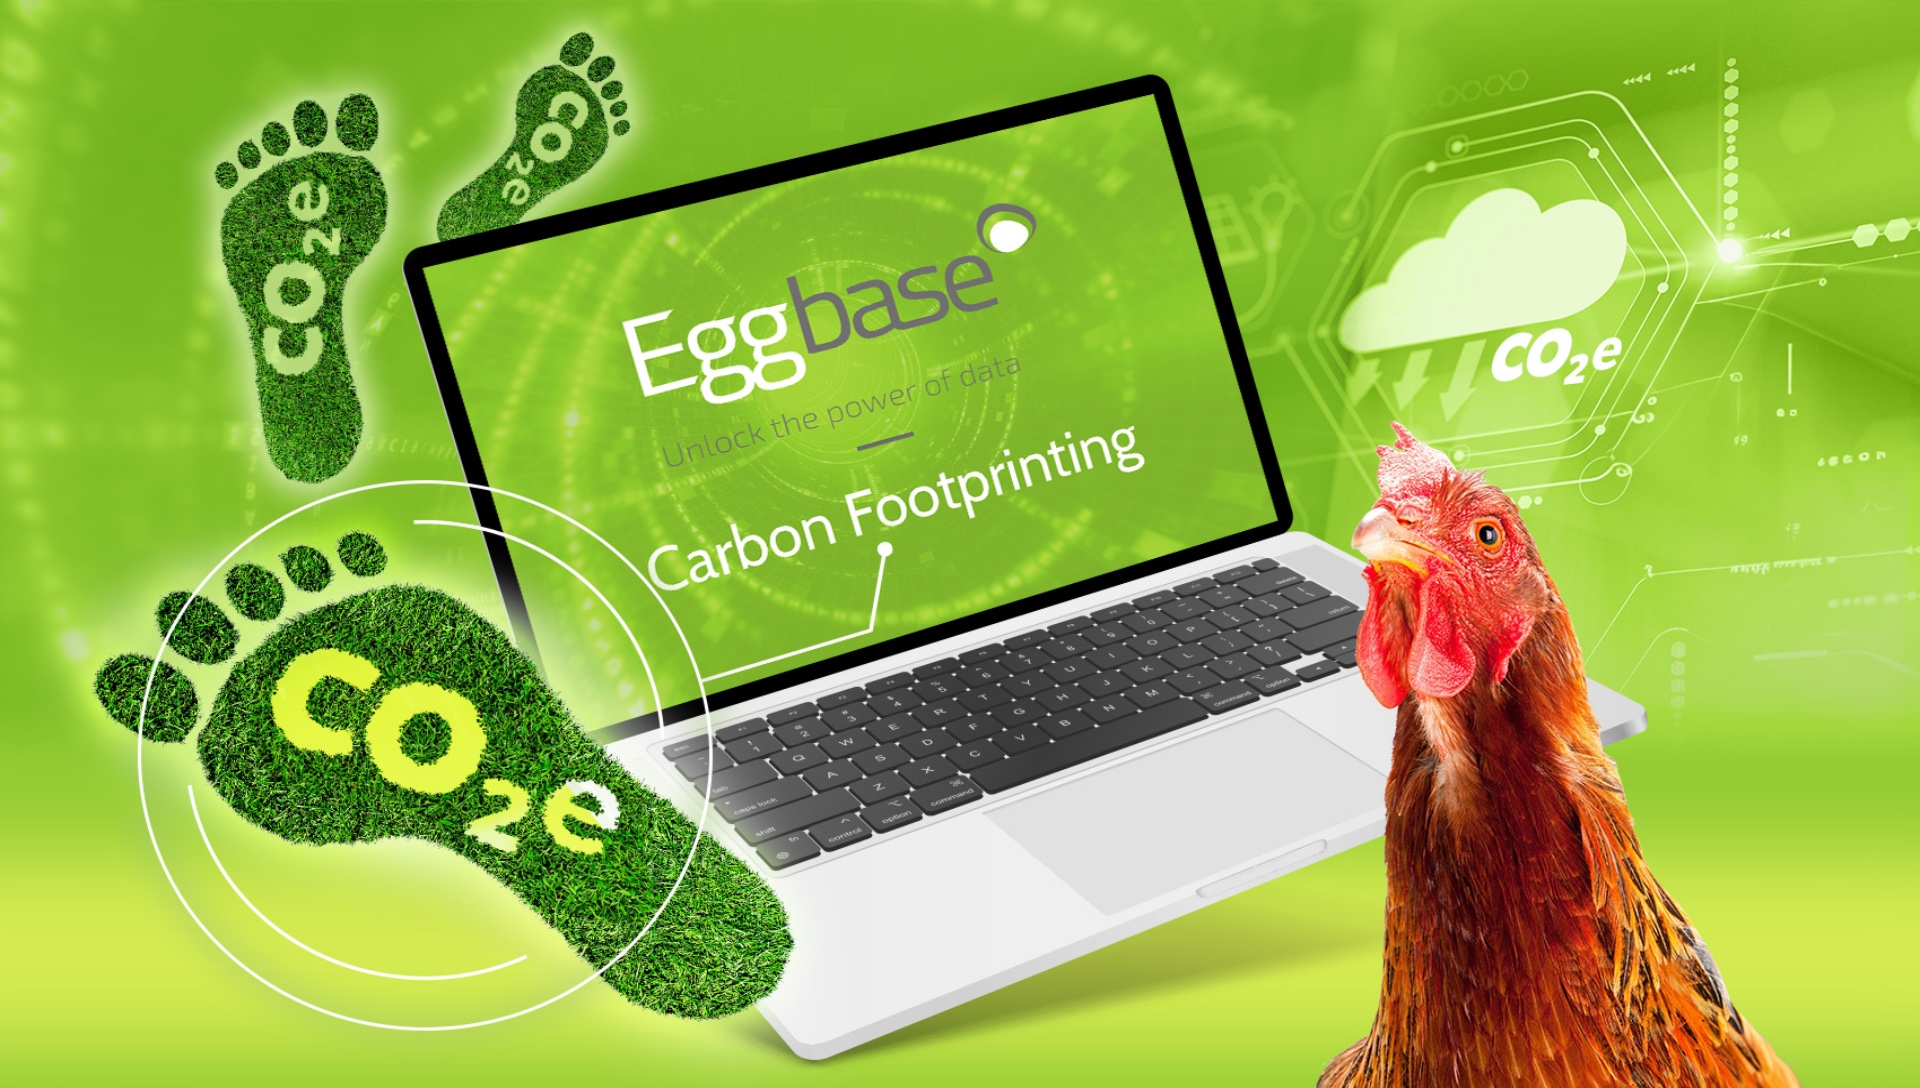 EGGBASE PRAISED IN THE RANGER ARTICLE COMPARING CARBON FOOTPRINTING TOOLS!